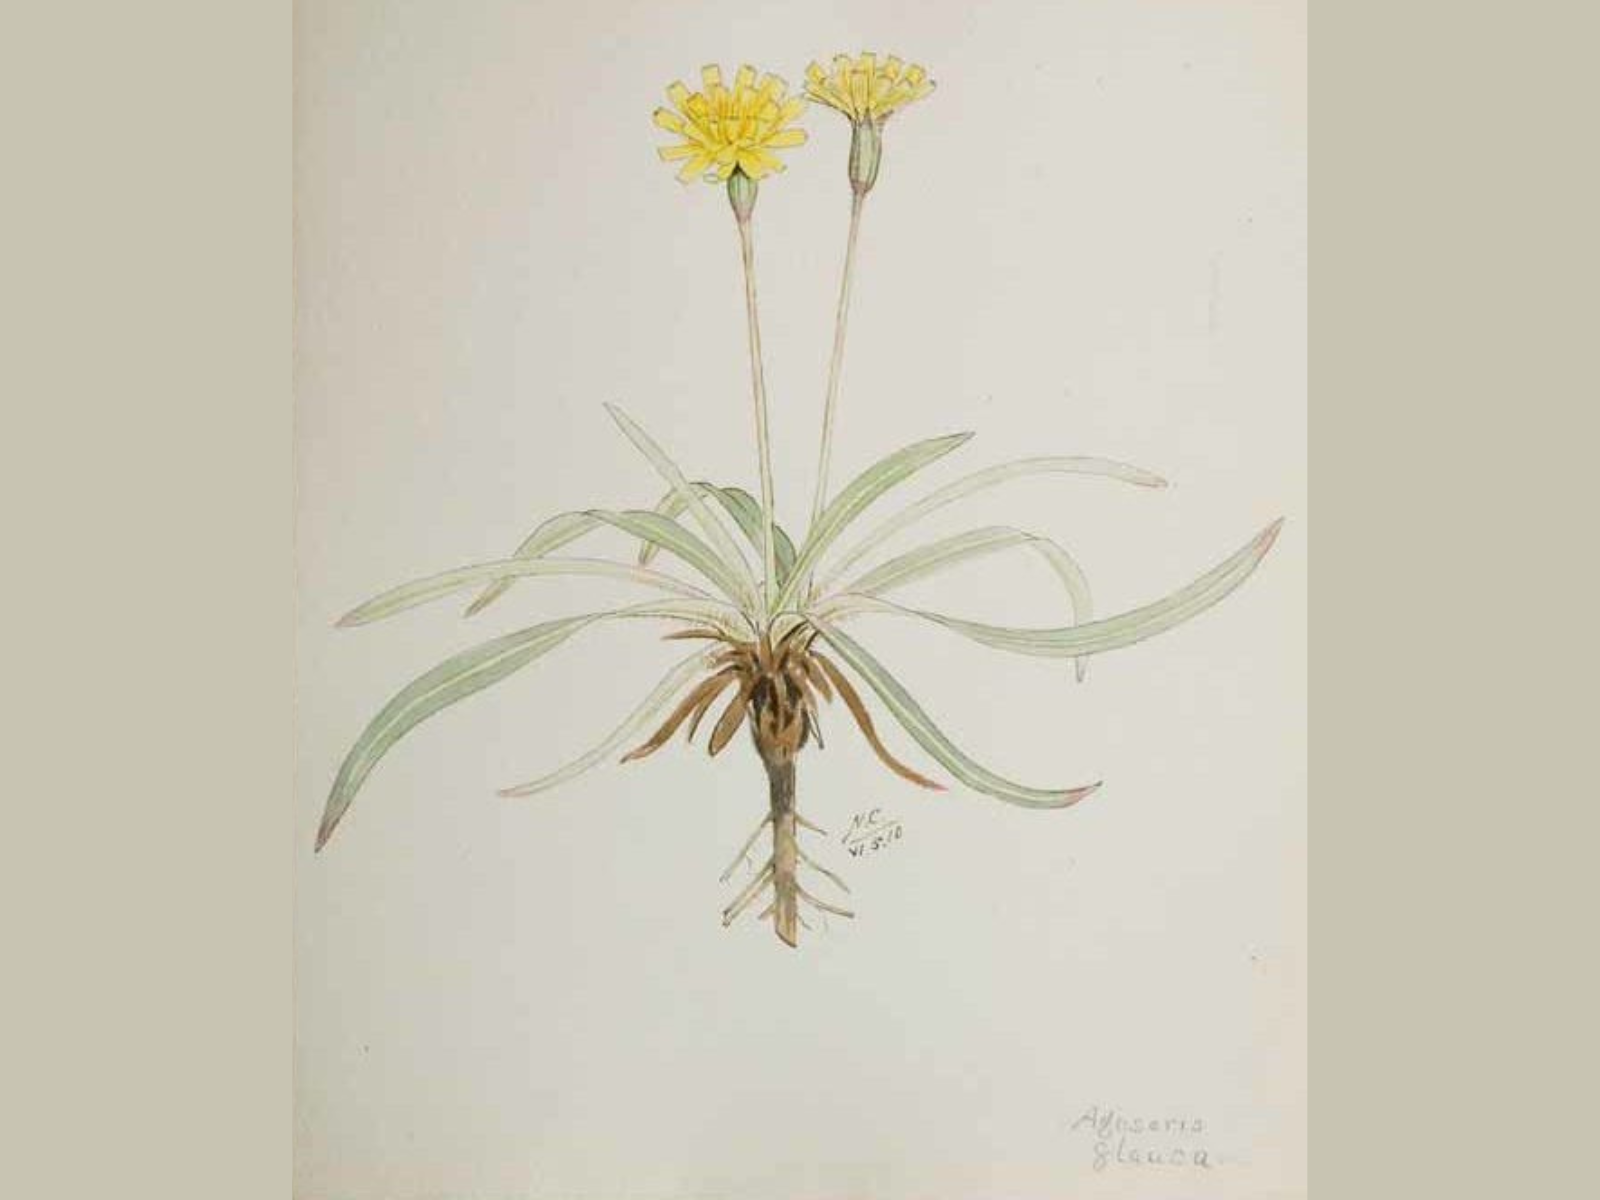 Hand-drawn illustration of a False dandelion, a plant with long green leaves, and fluffy yellow flower heads.